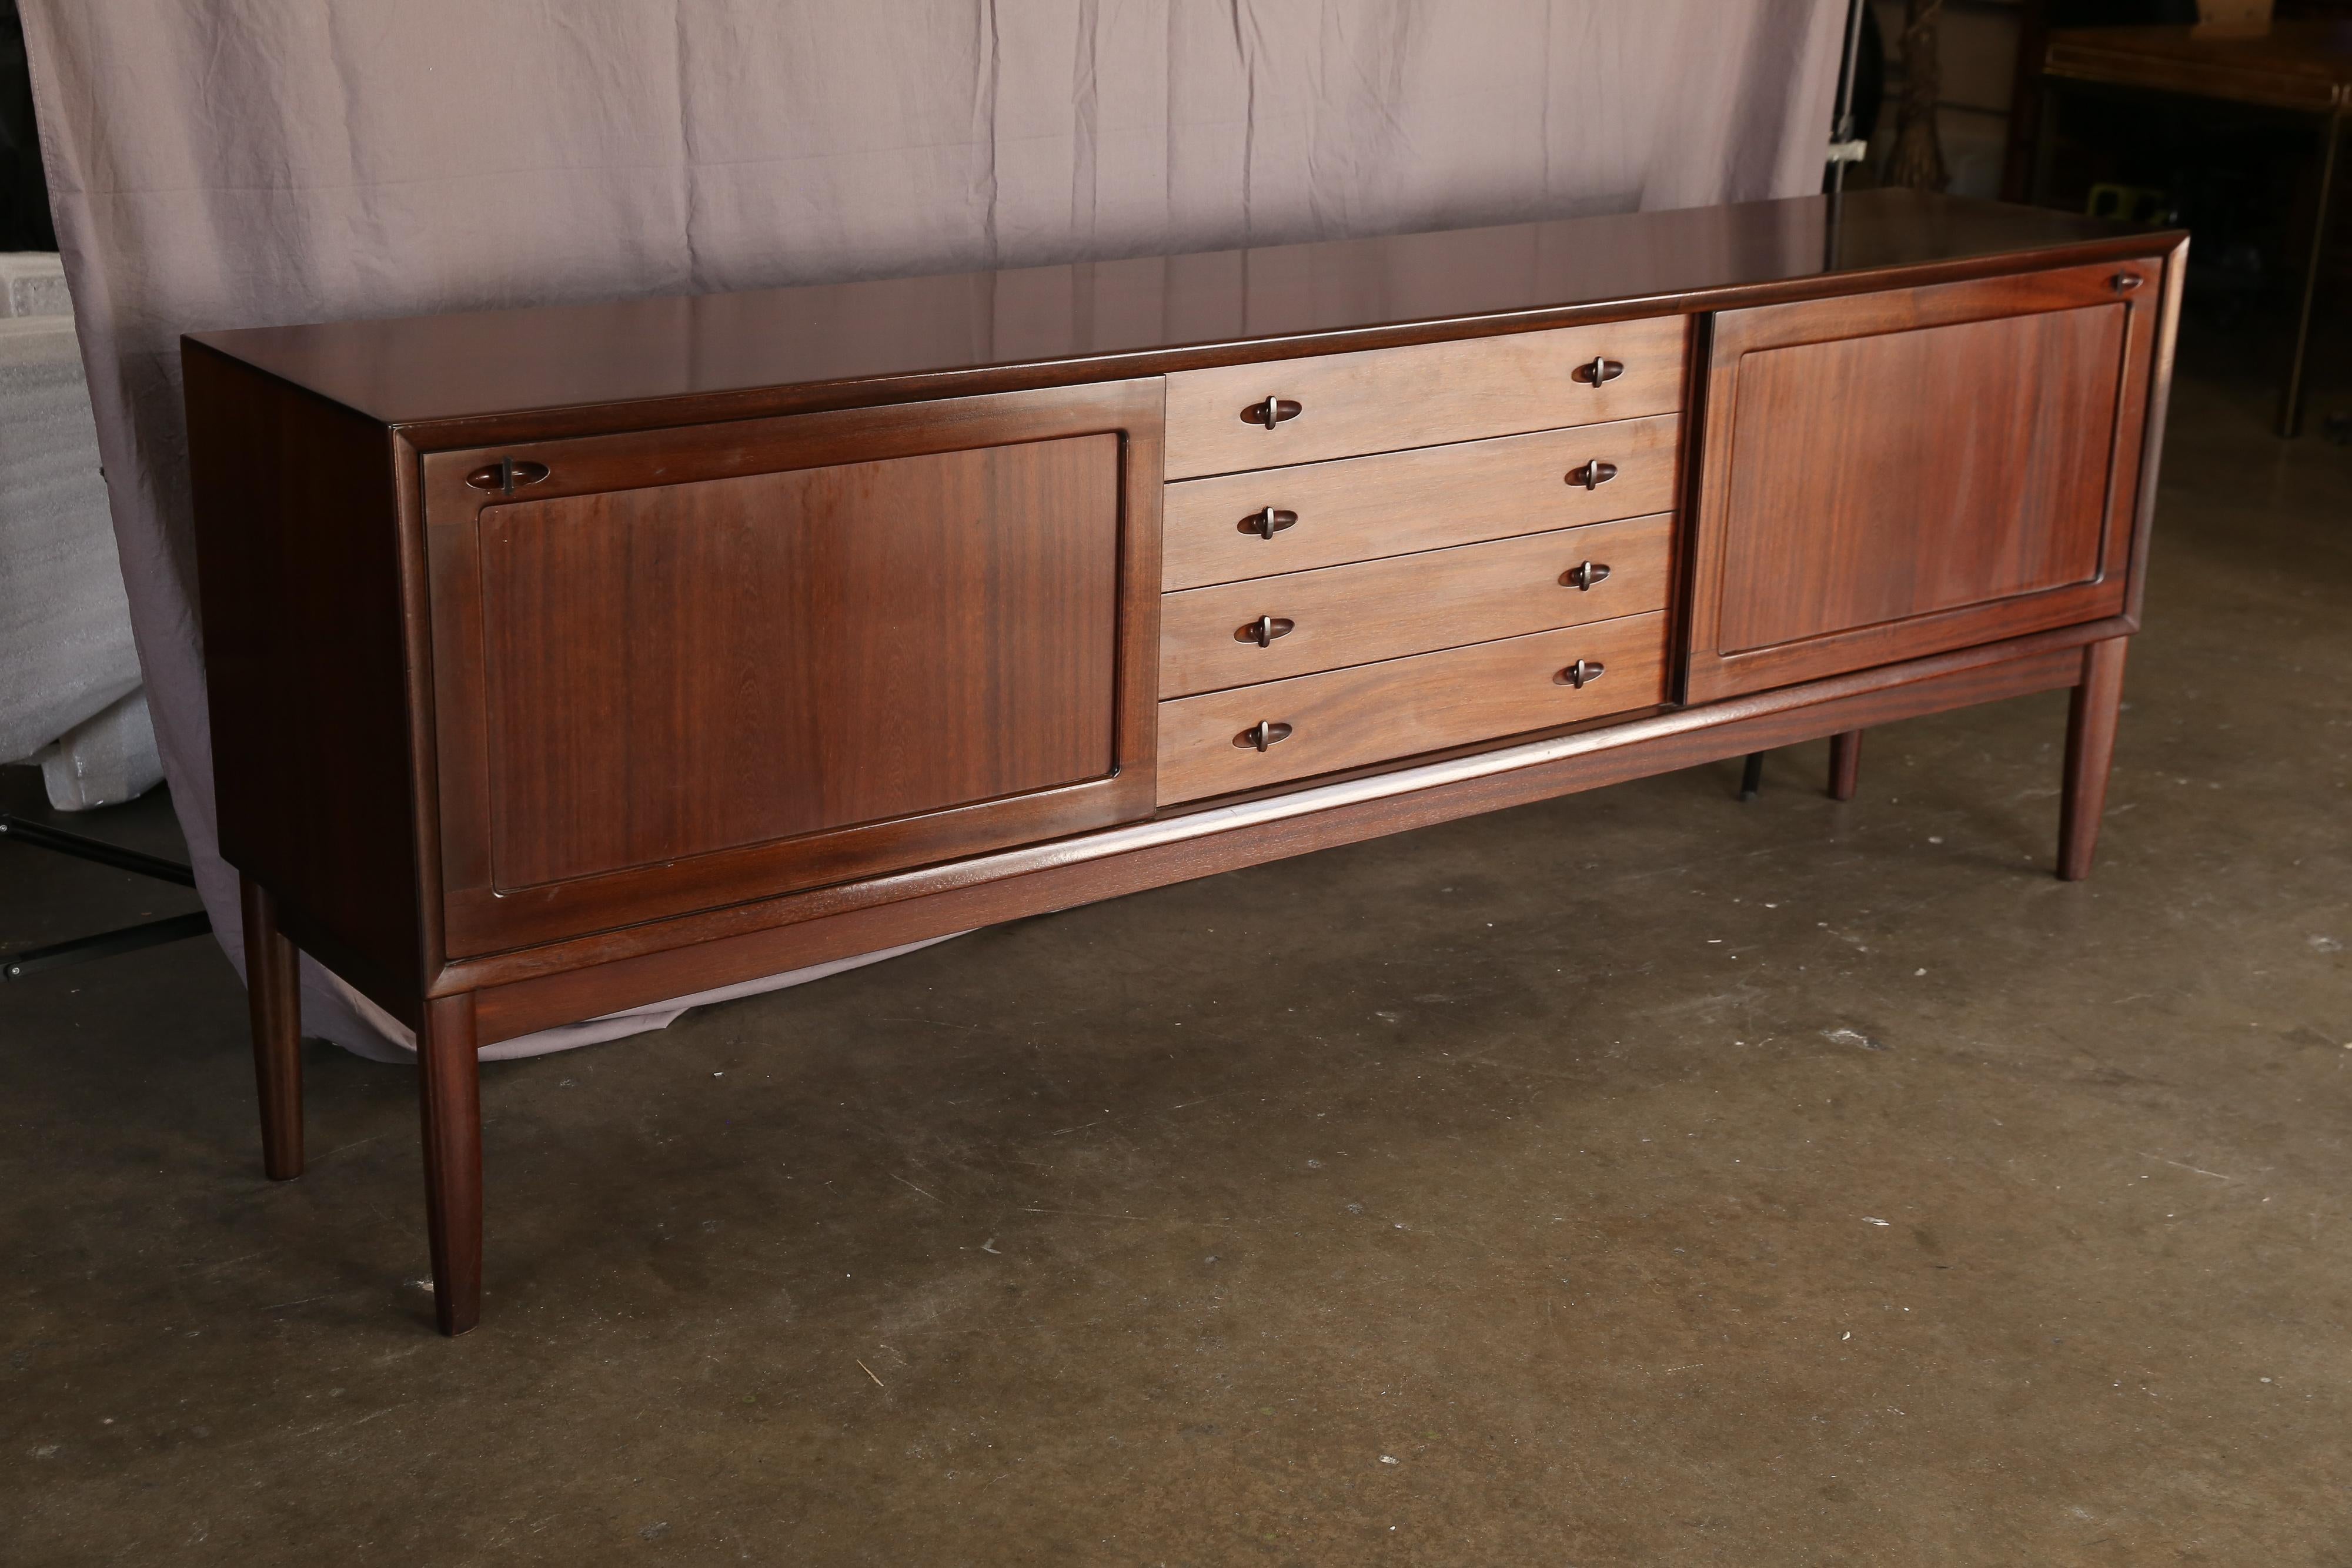 High quality mahogany sideboard. Designed by H. W. Klein for Bramin. Front with four drawers and two sliding doors. Behind sliding doors with shelves. Produced by Bramin Denmark. Note the beautiful organic shape of the legs and the straight lines of